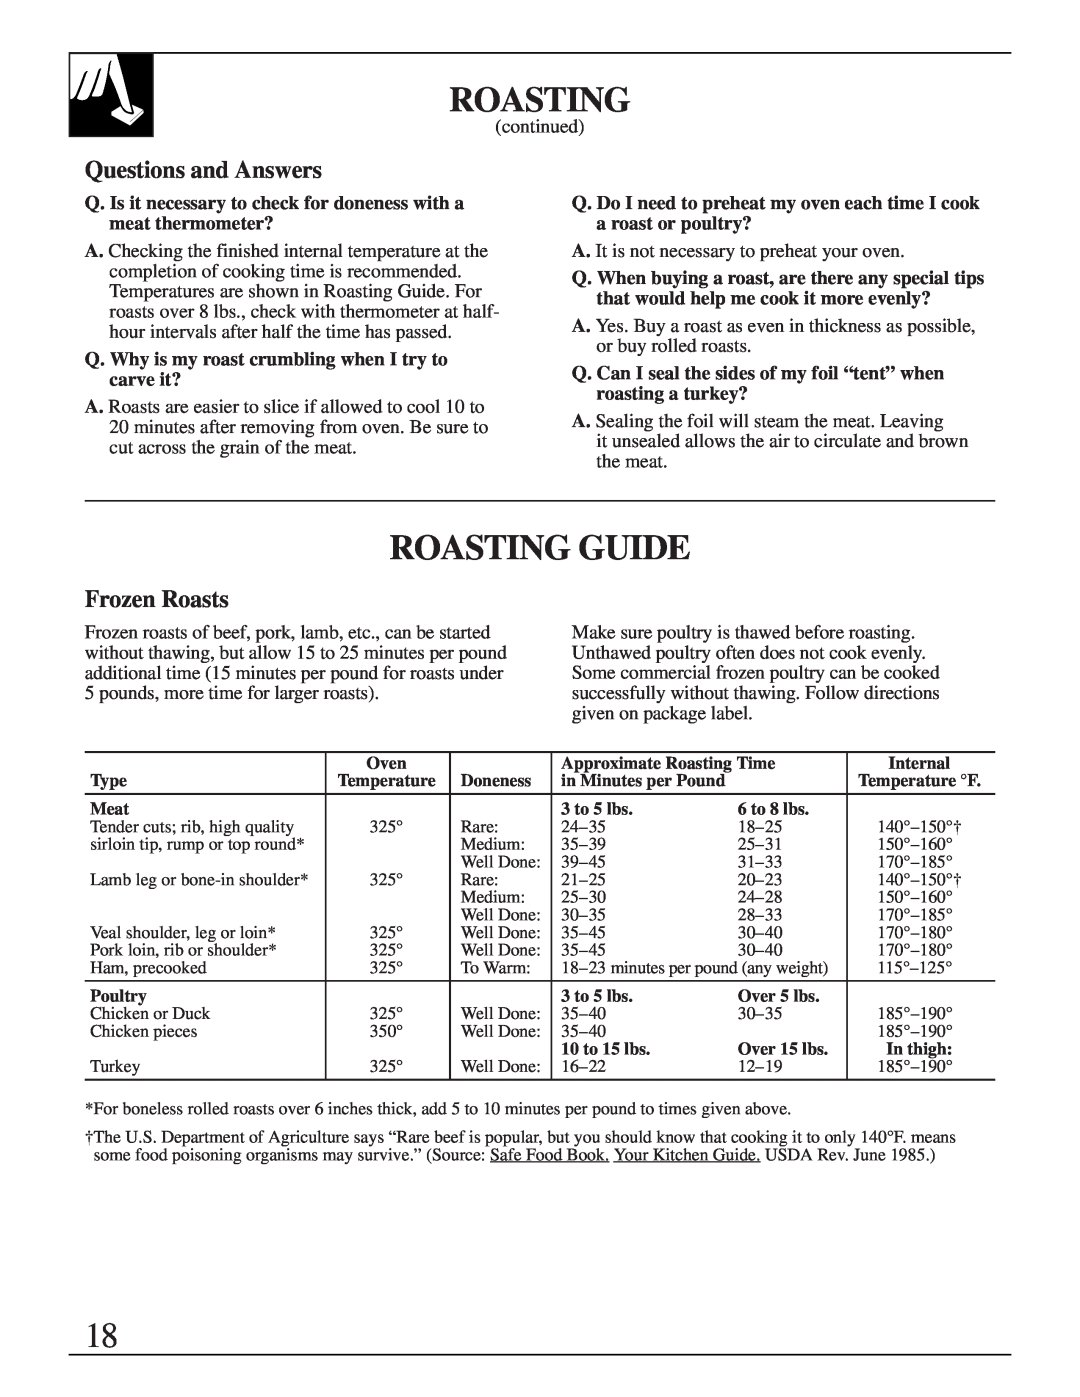 GE XL44TM Roasting Guide, Questions and Answers, Frozen Roasts, Q. Why is my roast crumbling when I try to carve it? 